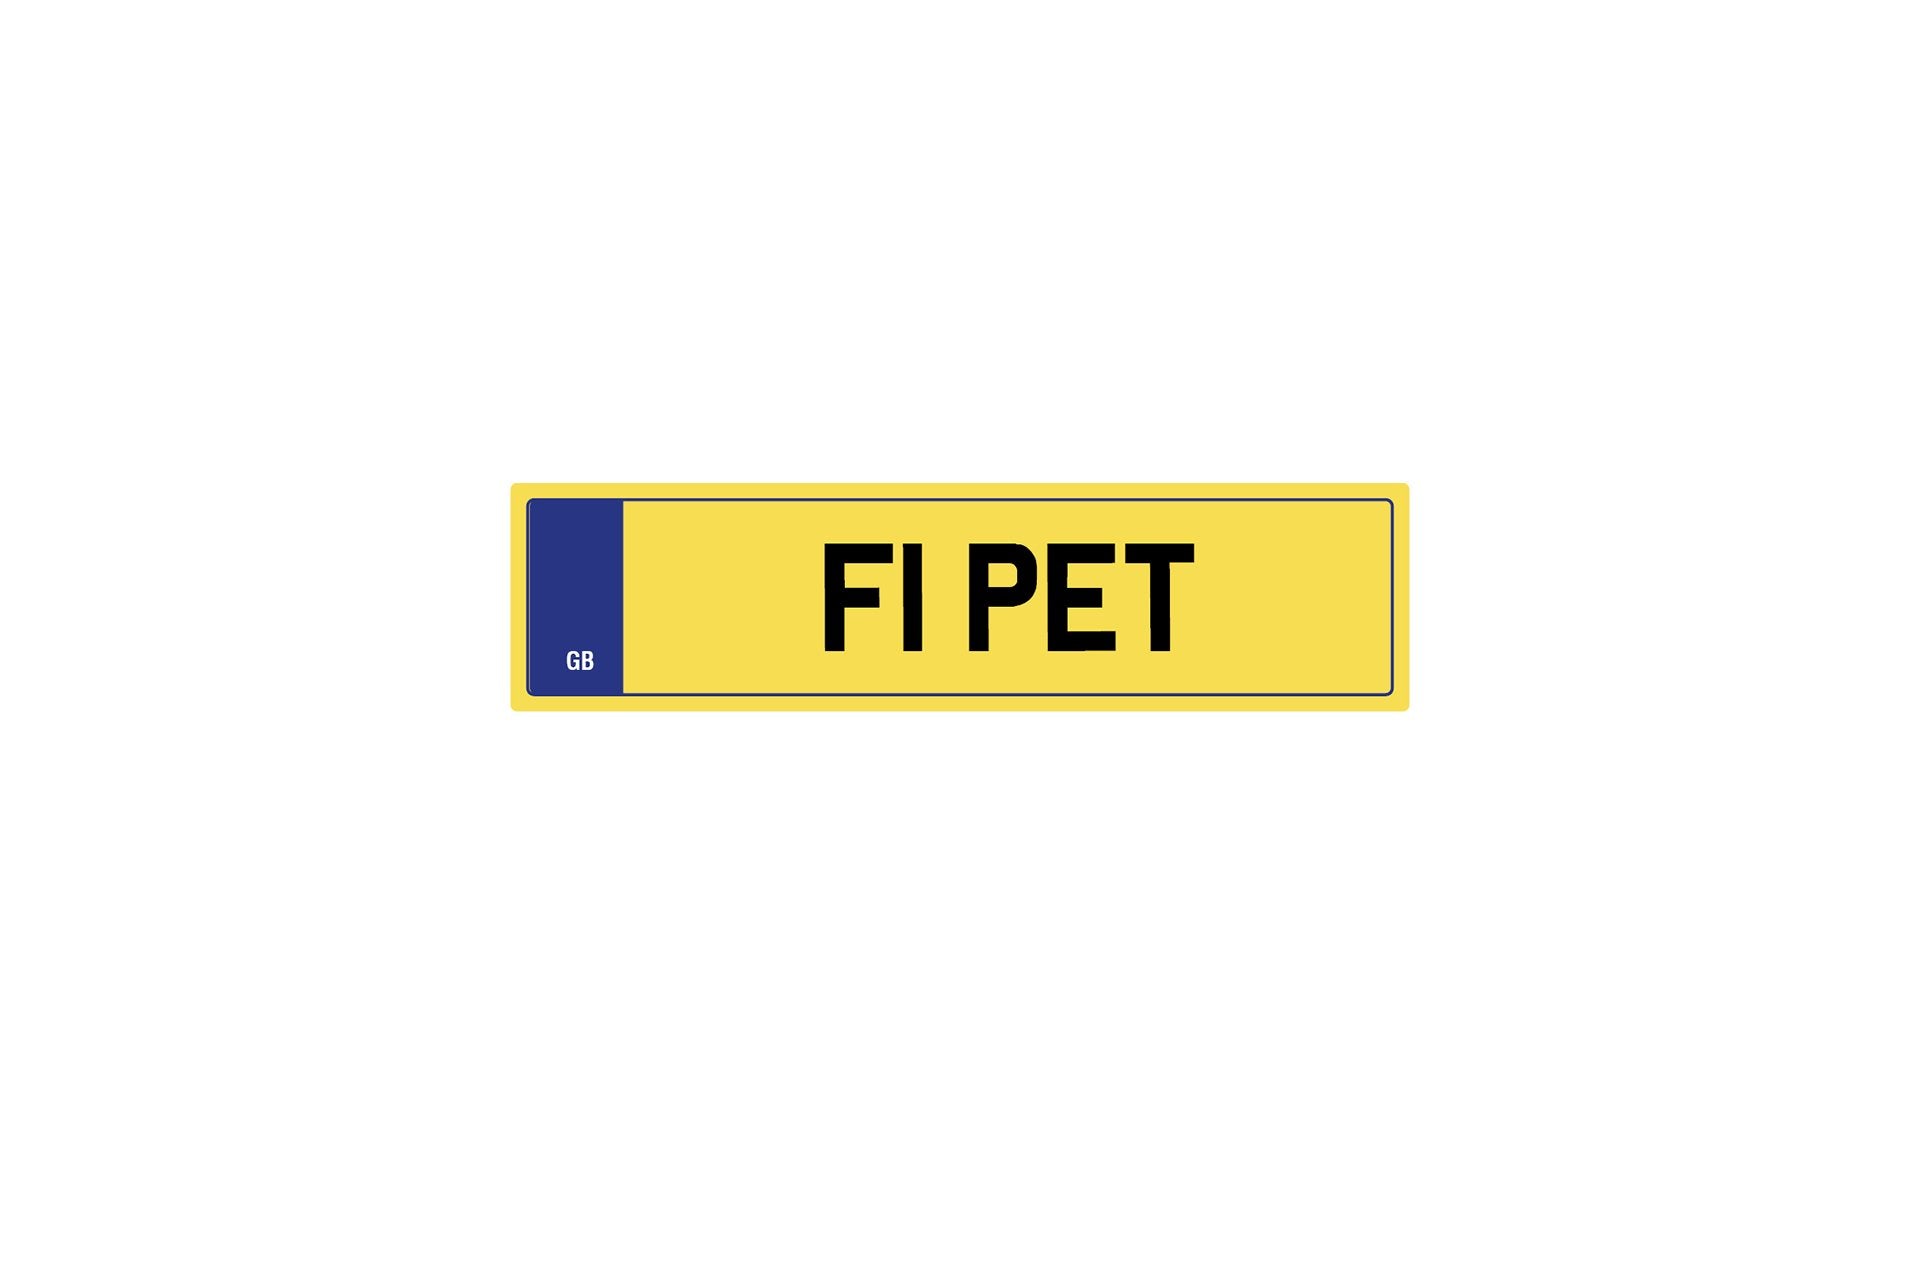 Private Plate F1 Pet by Kahn - Image 249